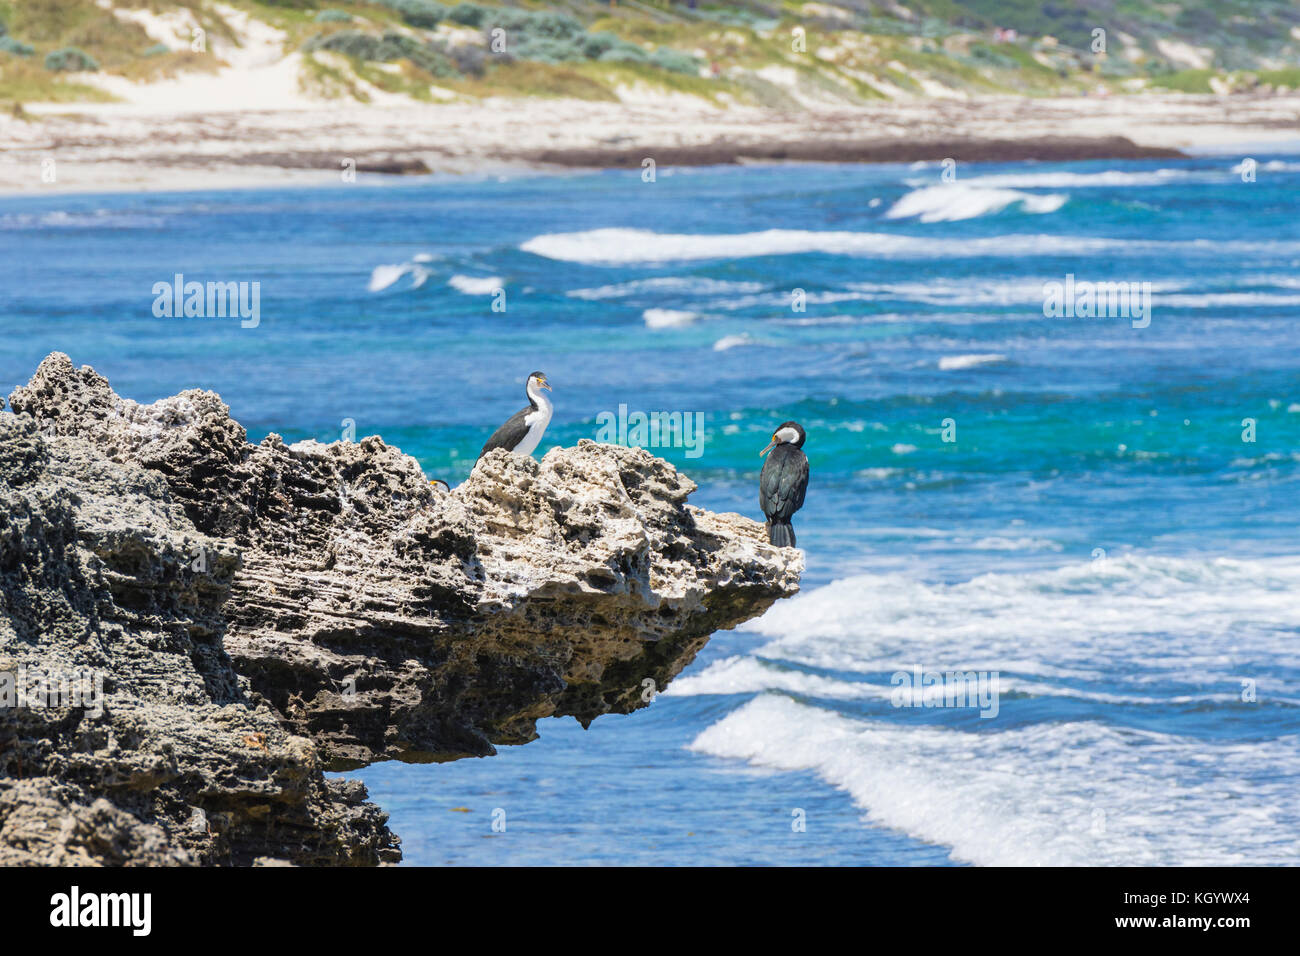 Australian Pied Cormorants perched on a limestone outcrop over the Indian Ocean, Cottesloe, Perth, Western Australia Stock Photo